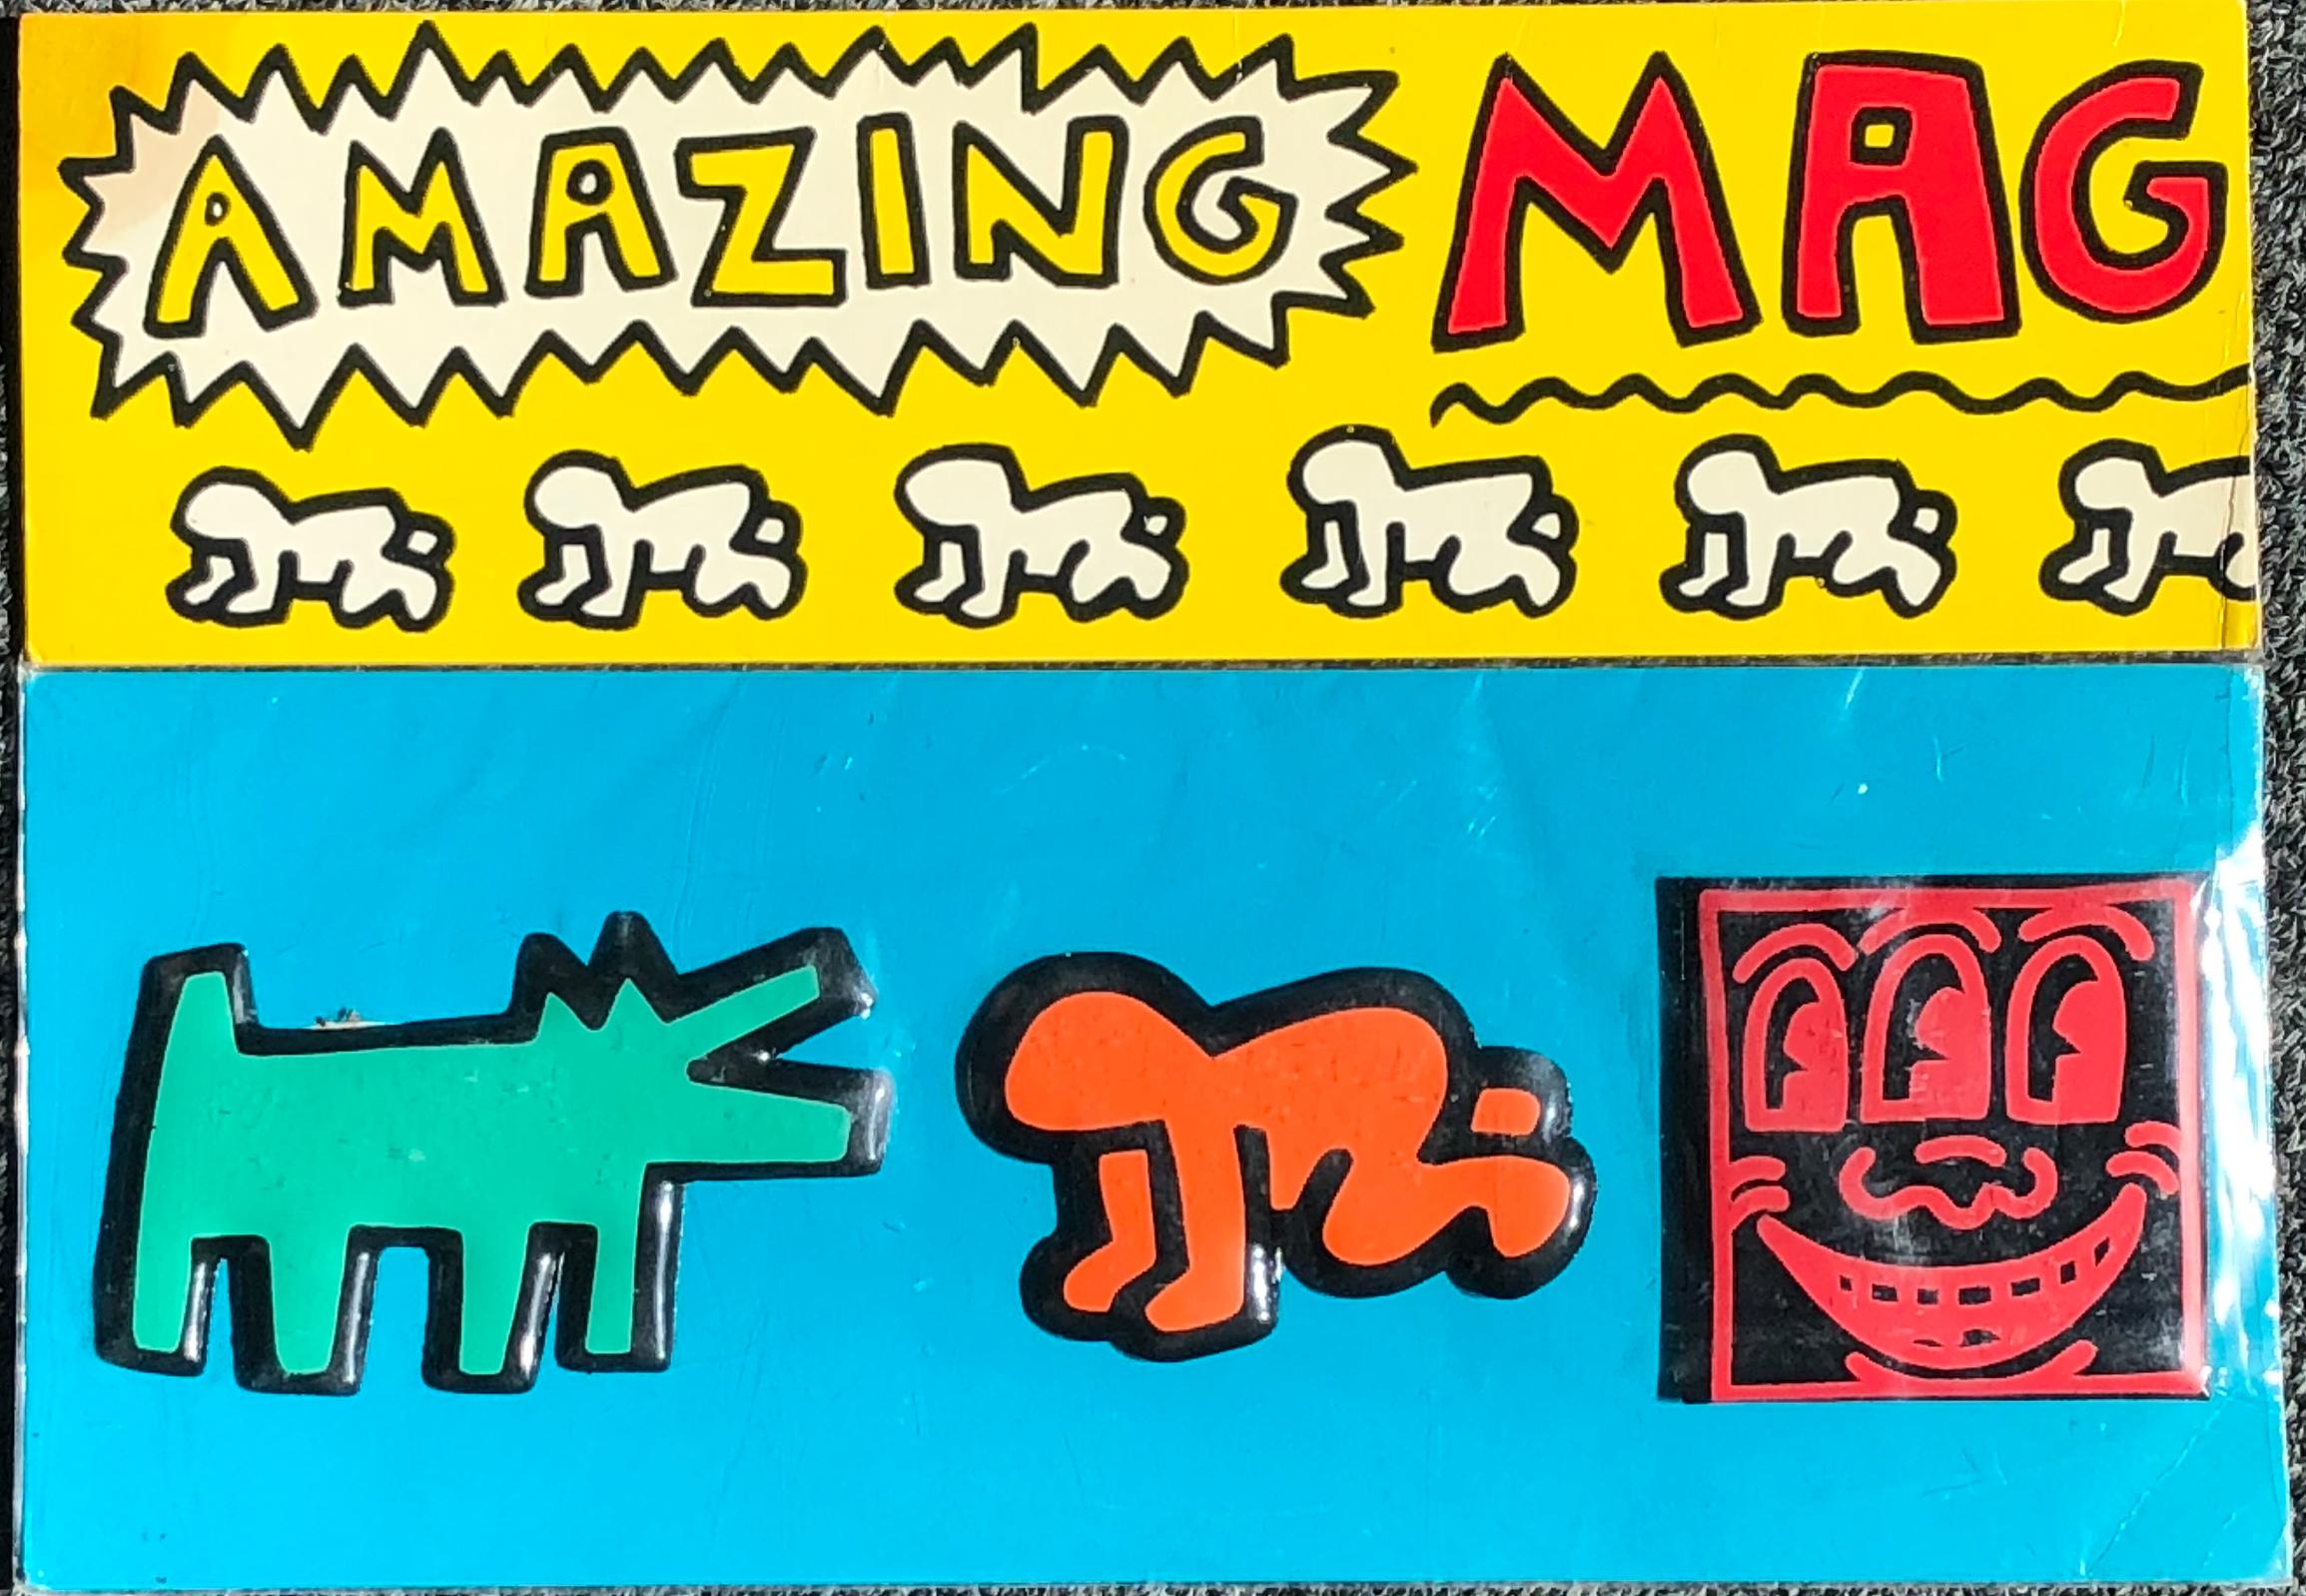 keith haring magnets